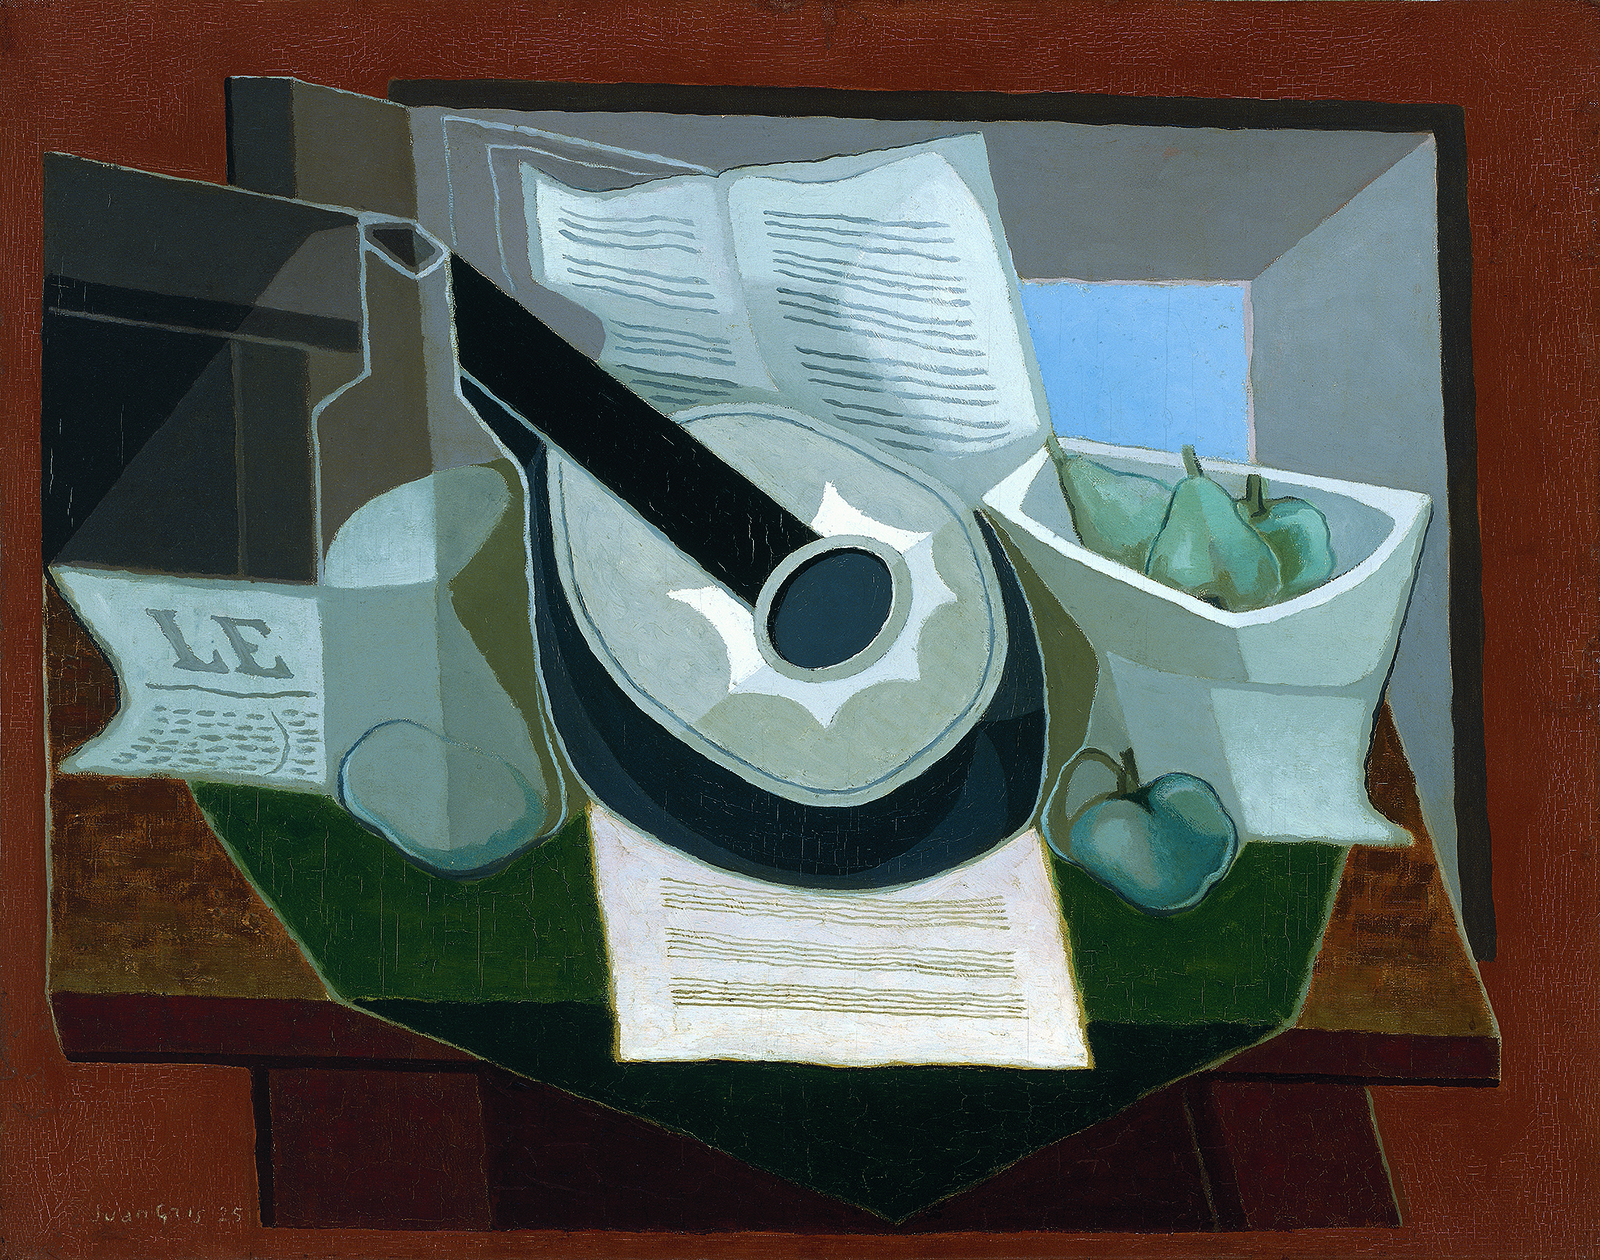 “Mandolin and Fruit Dish” by Juan Gris, 1925. Oil on canvas. Museum of Fine Arts, Boston. Gift of Joseph Pulitzer Jr. Photo ©2021 Museum of Fine Arts, Boston.